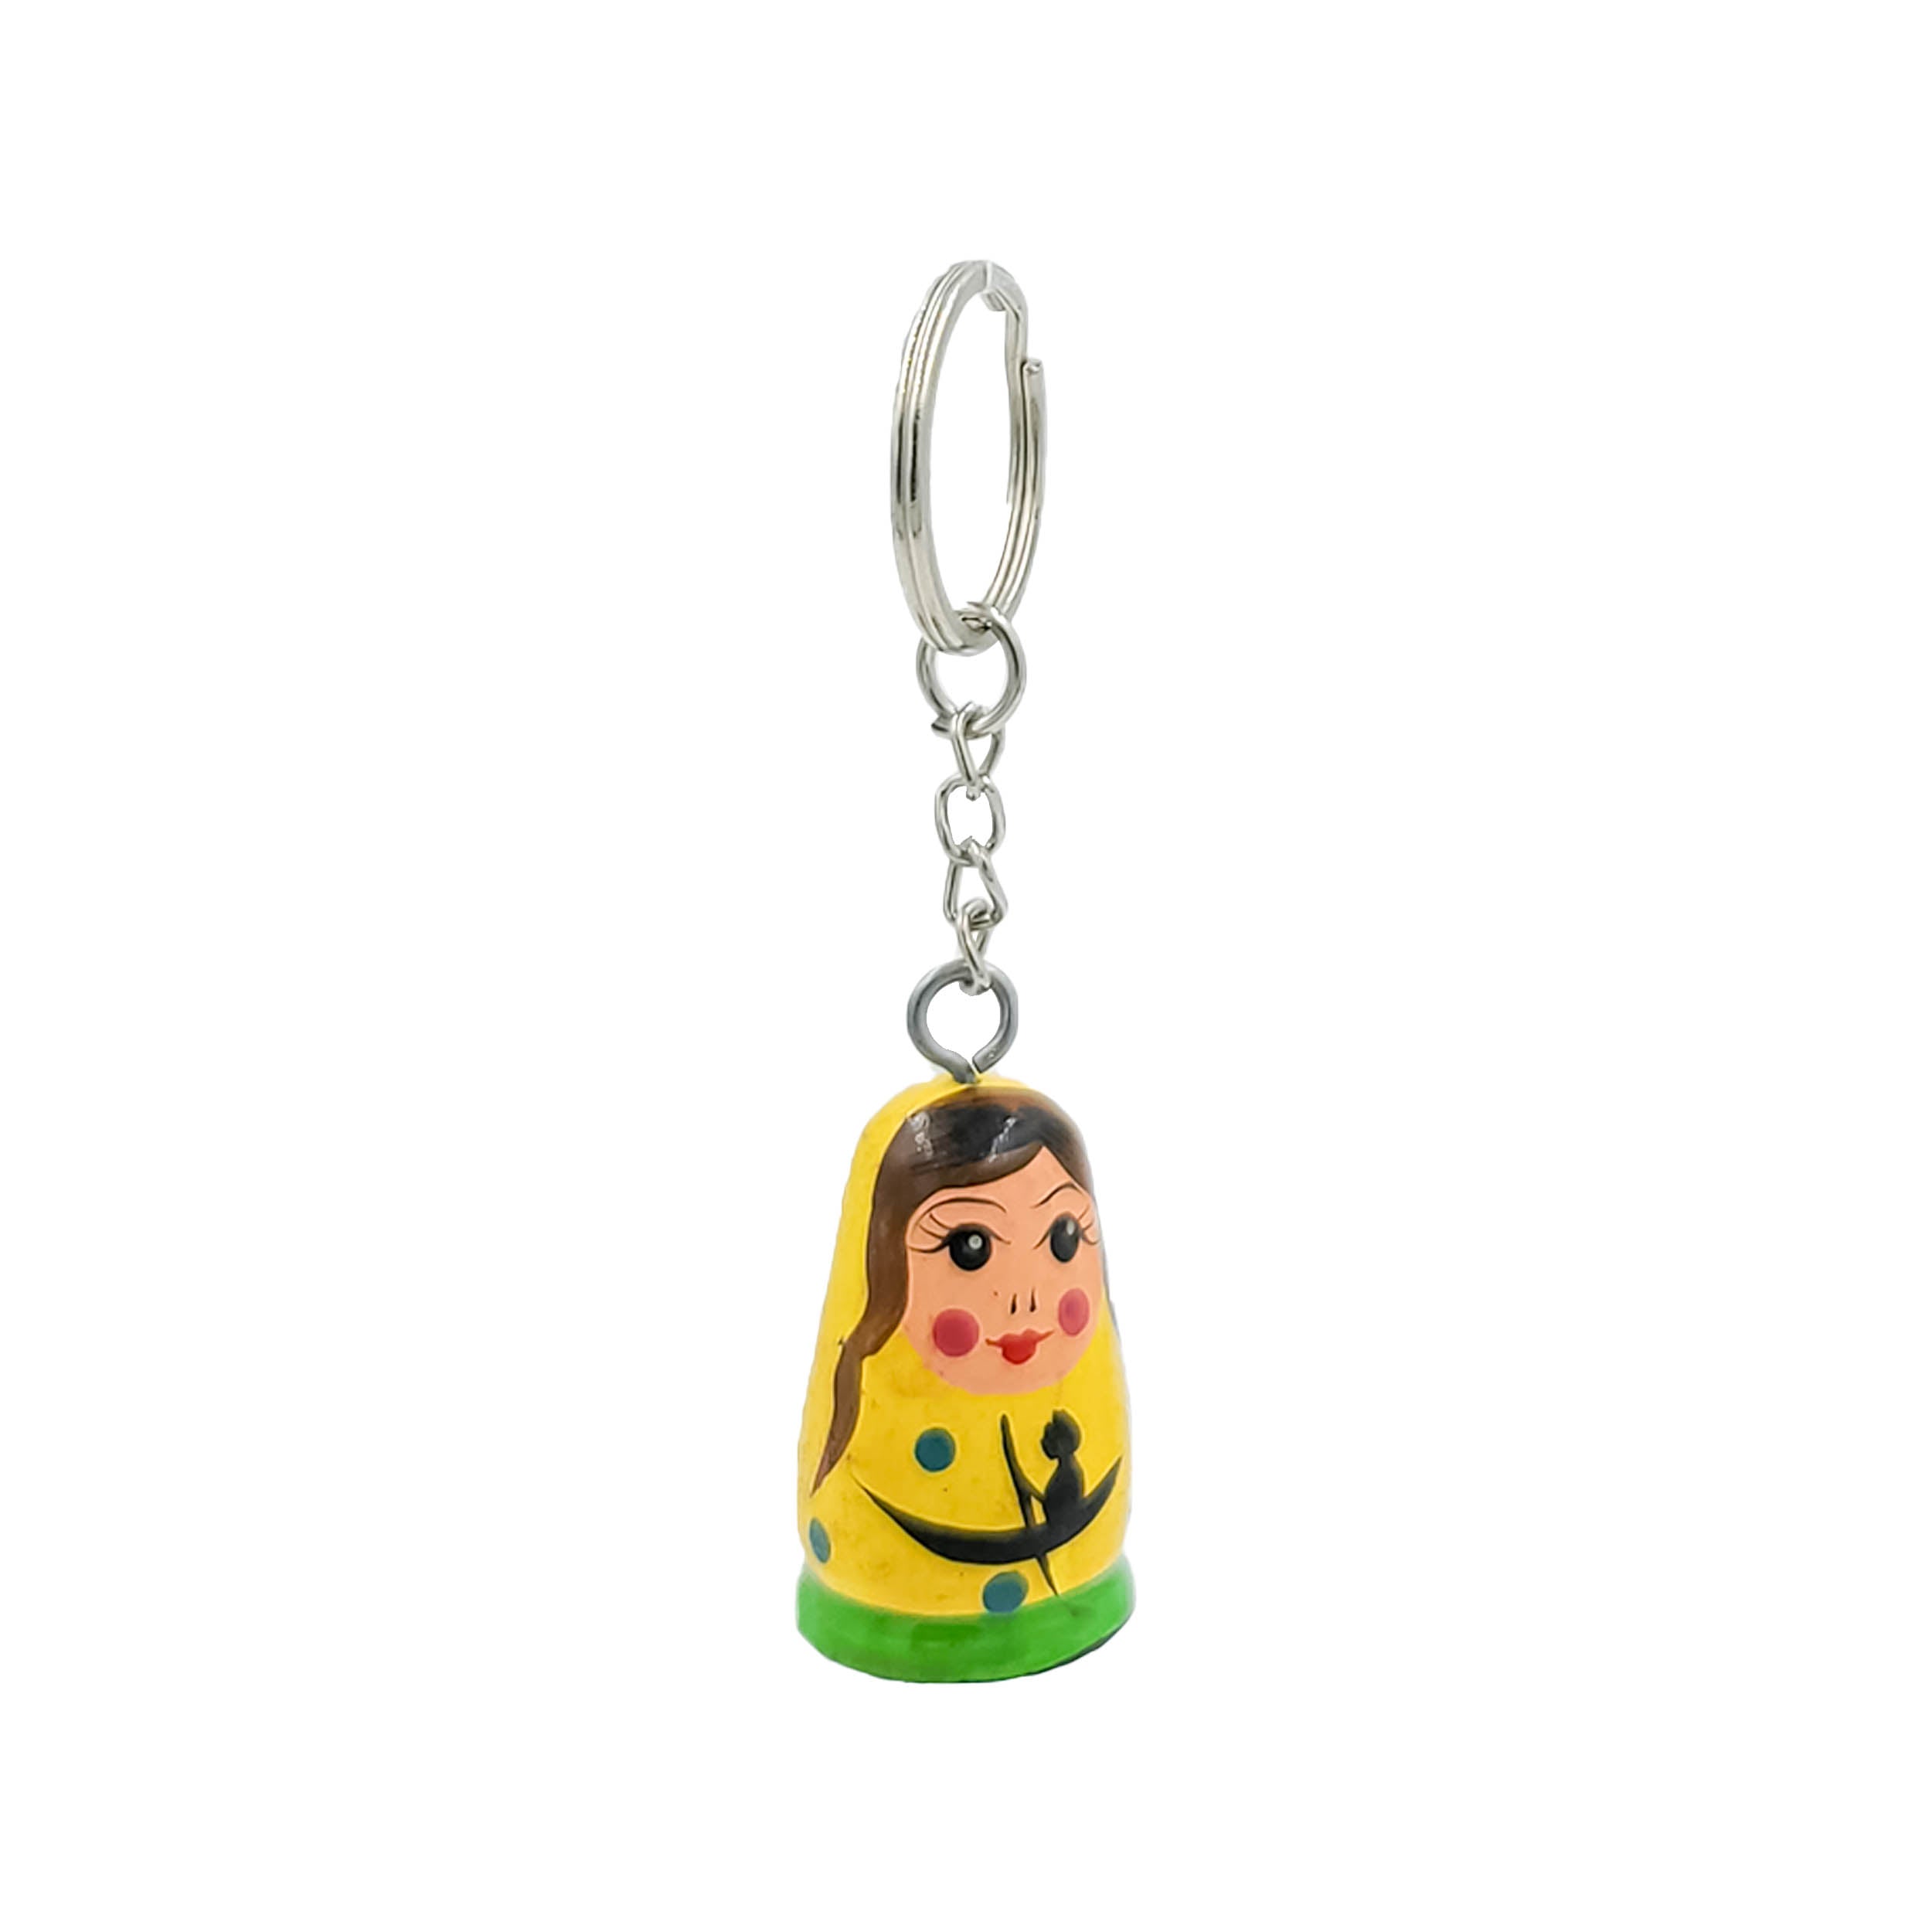 Unleash Creativity with Handcrafted Wooden Keyring Stocking Stuffers for Kids - Assorted